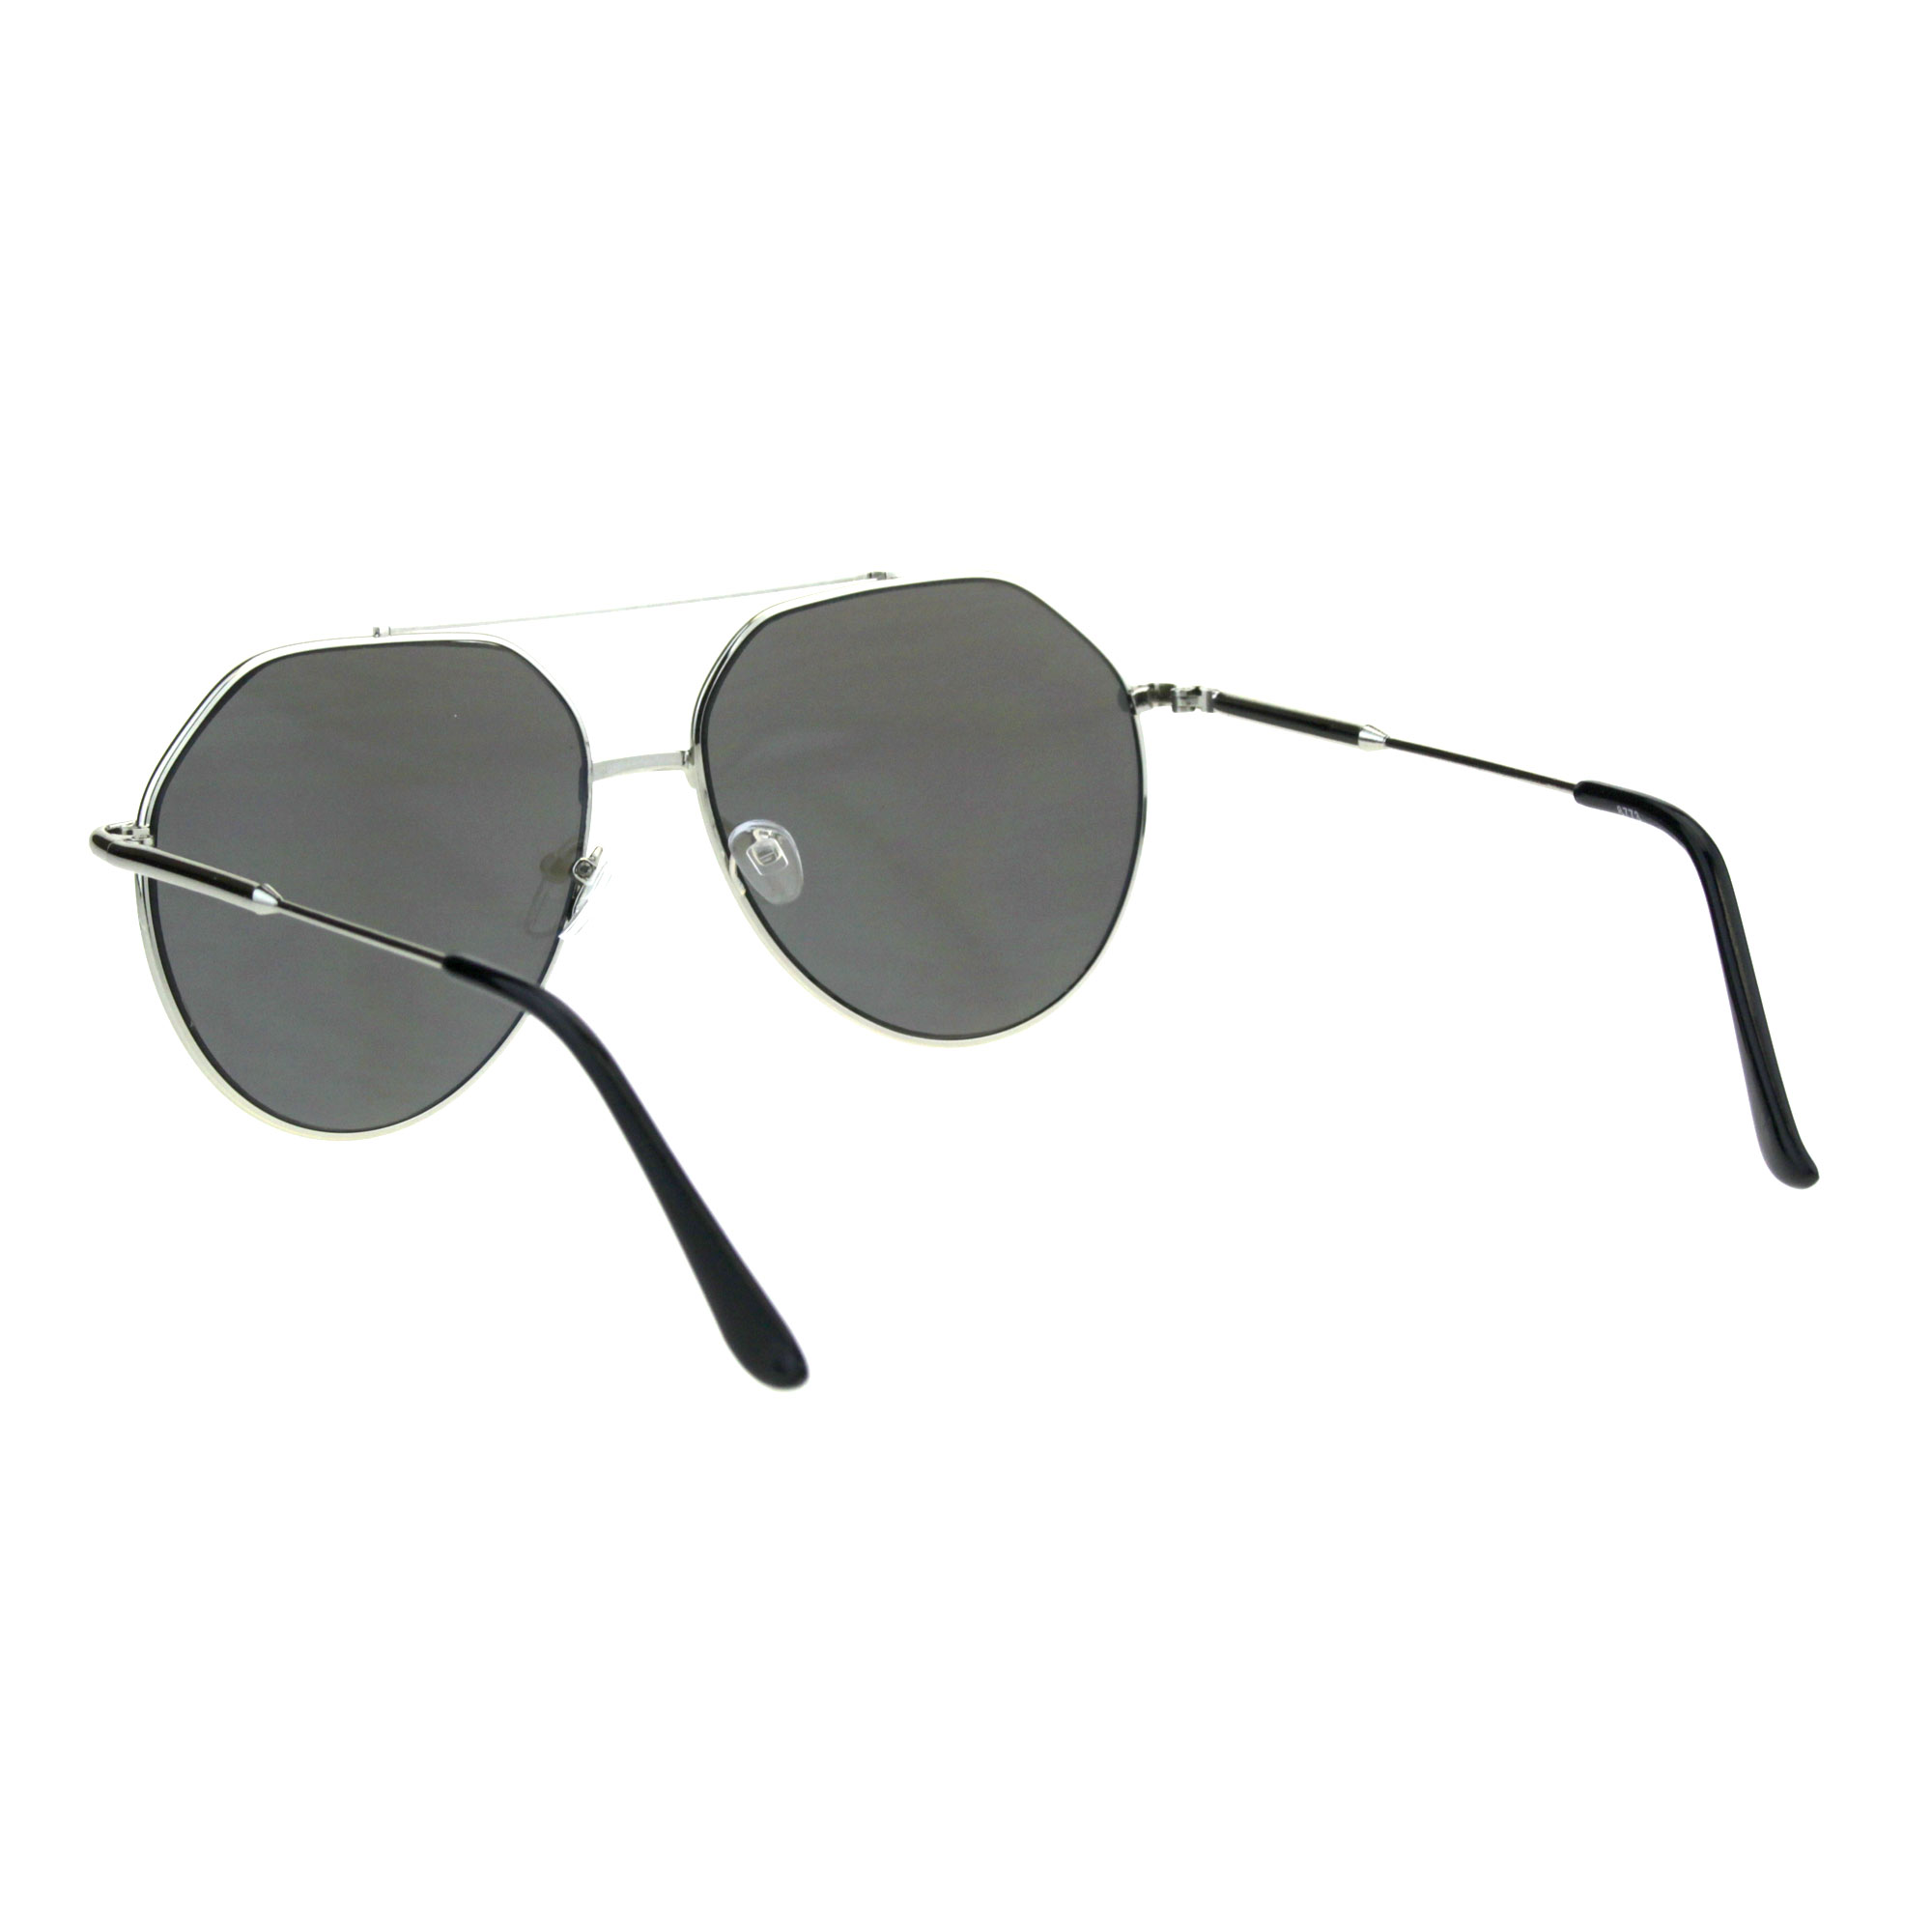 Mens Thin Metal Oversize Vintage Style Pilots Officer Sunglasses Silver Mirror - image 4 of 4